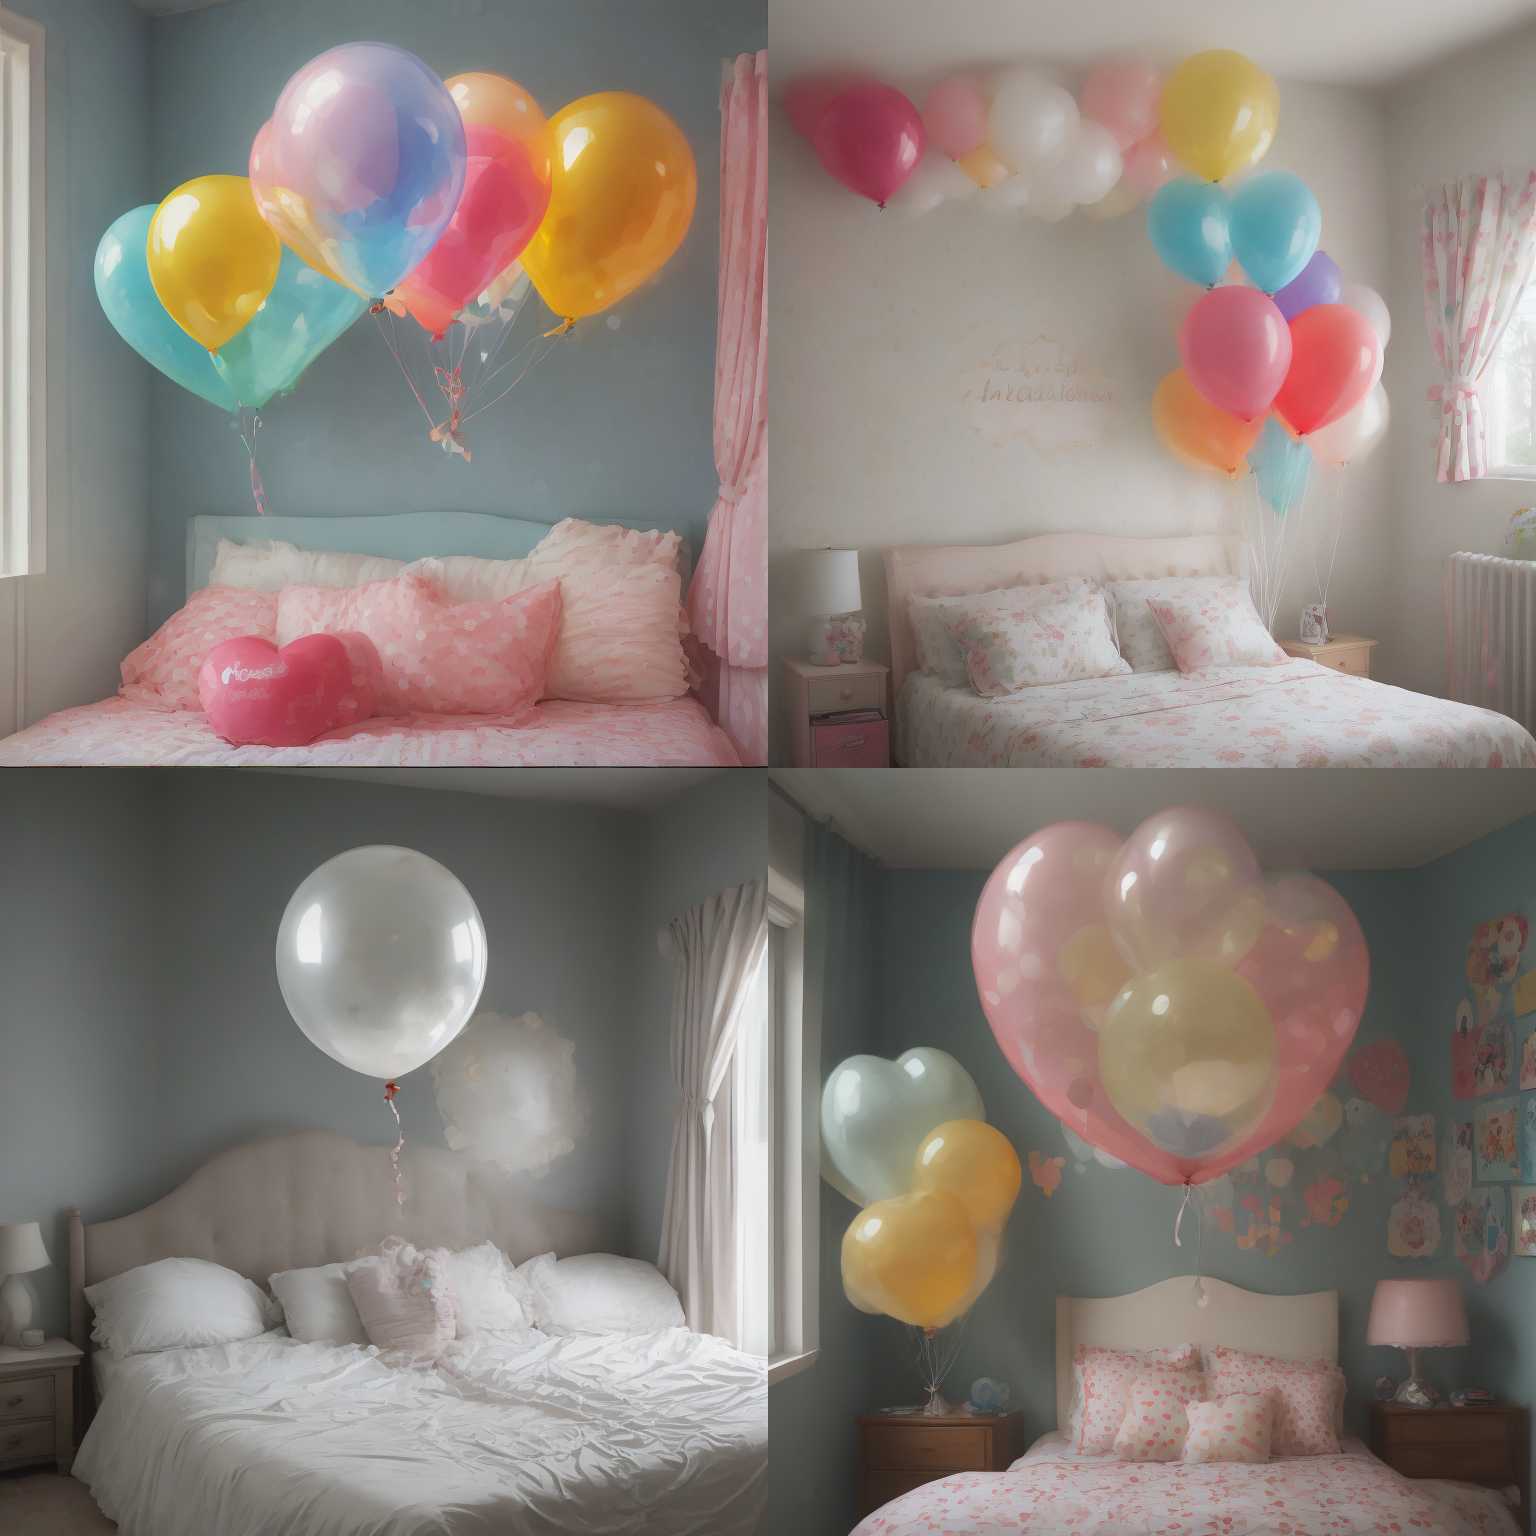 A balloon filled with helium in the bedroom